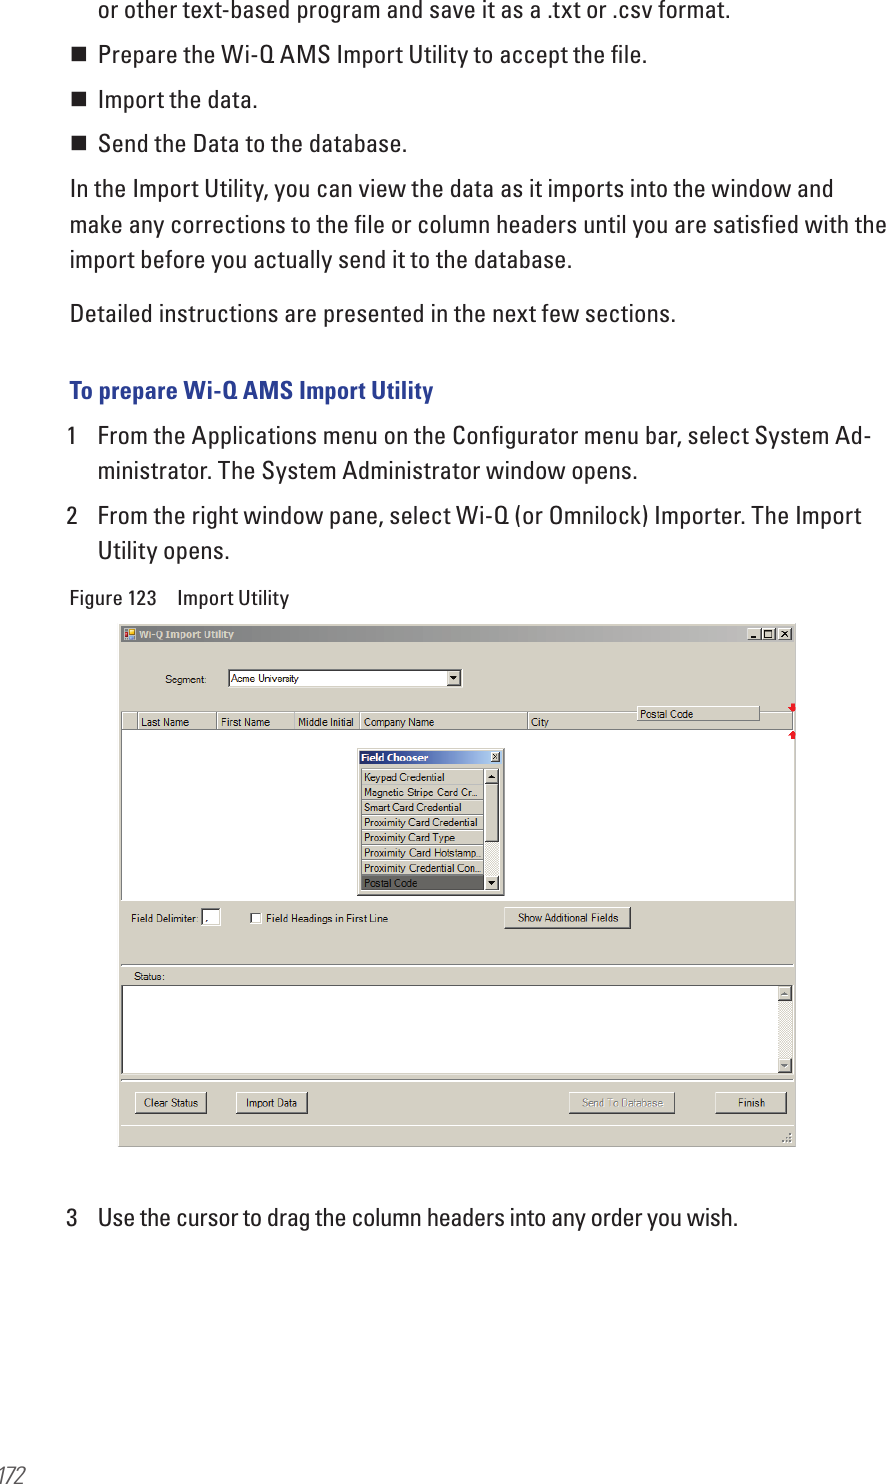 172or other text-based program and save it as a .txt or .csv format. Prepare the Wi-Q AMS Import Utility to accept the ﬁle. Import the data. Send the Data to the database.In the Import Utility, you can view the data as it imports into the window and make any corrections to the ﬁle or column headers until you are satisﬁed with the import before you actually send it to the database. Detailed instructions are presented in the next few sections.To prepare Wi-Q AMS Import Utility1  From the Applications menu on the Conﬁgurator menu bar, select System Ad-ministrator. The System Administrator window opens. 2  From the right window pane, select Wi-Q (or Omnilock) Importer. The Import Utility opens.Figure 123  Import Utility3  Use the cursor to drag the column headers into any order you wish. 